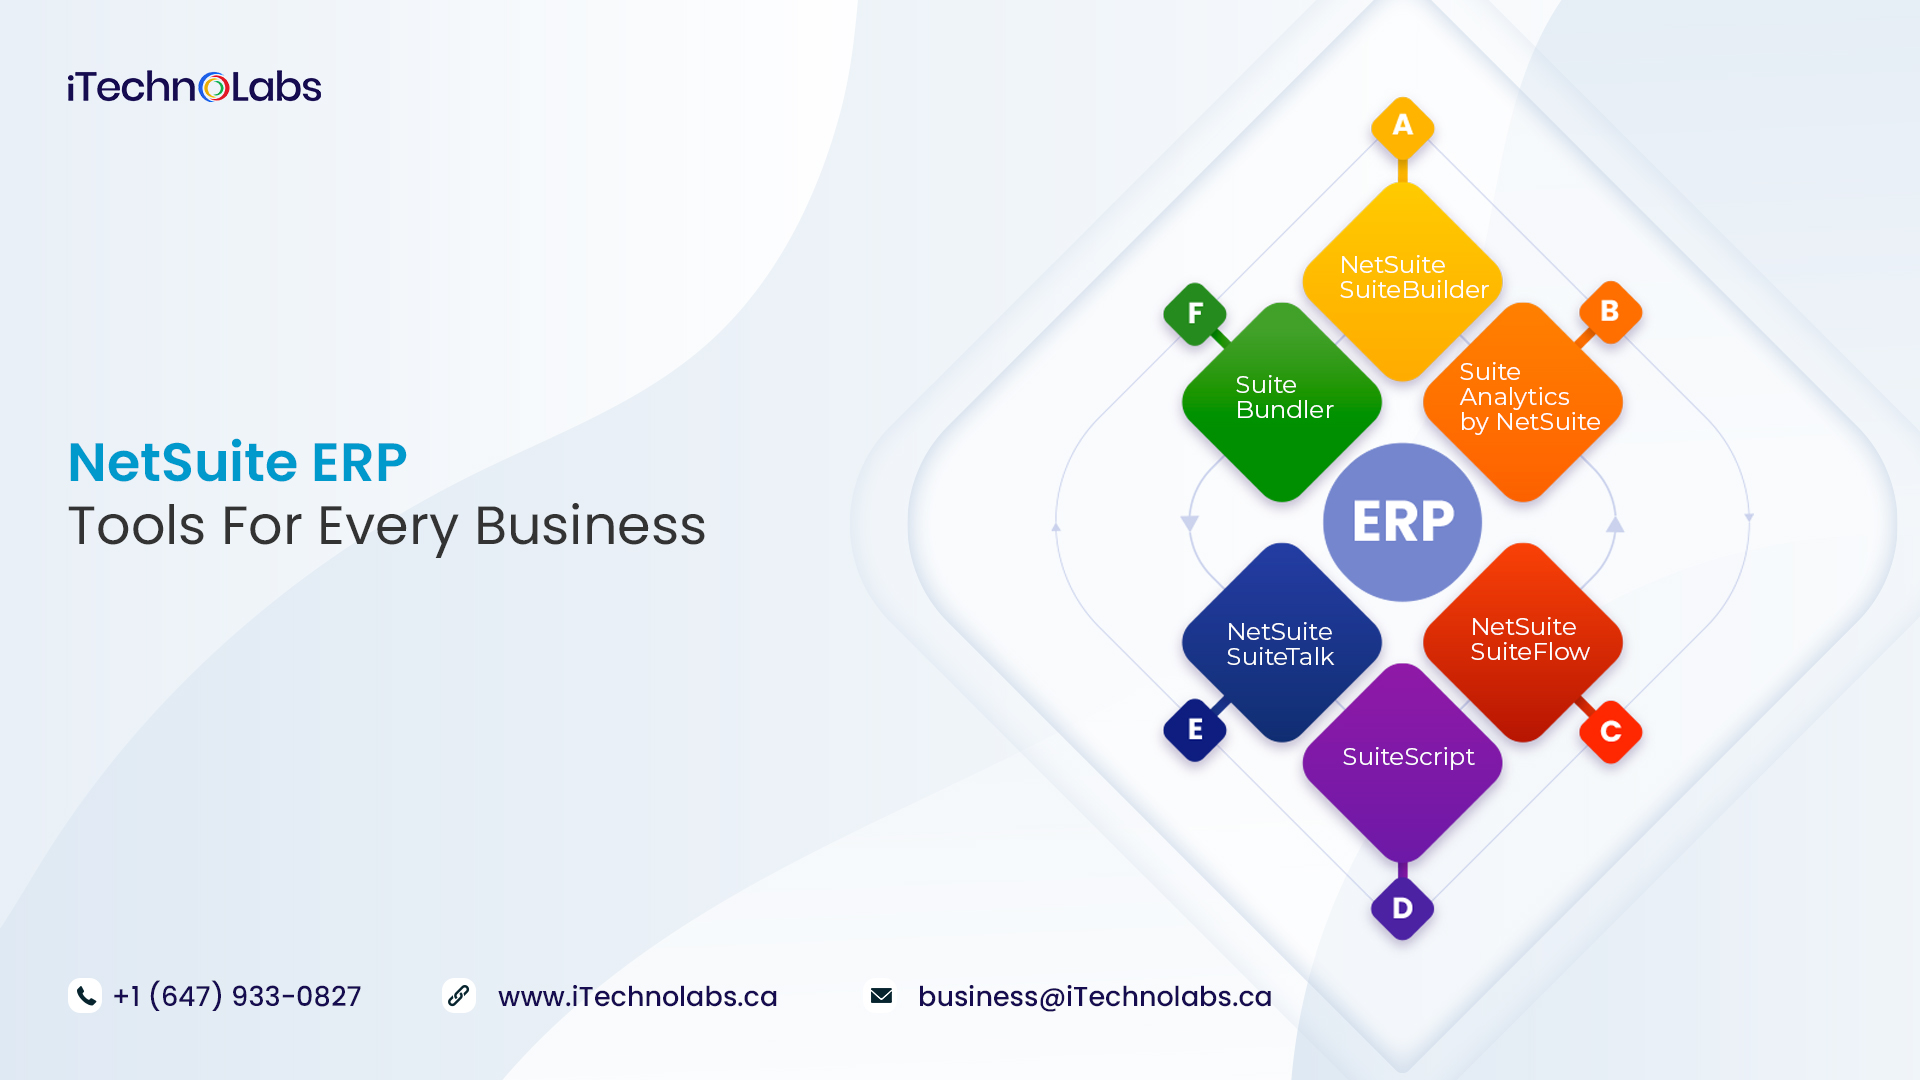 netsuite erp tools for every business itechnolabs